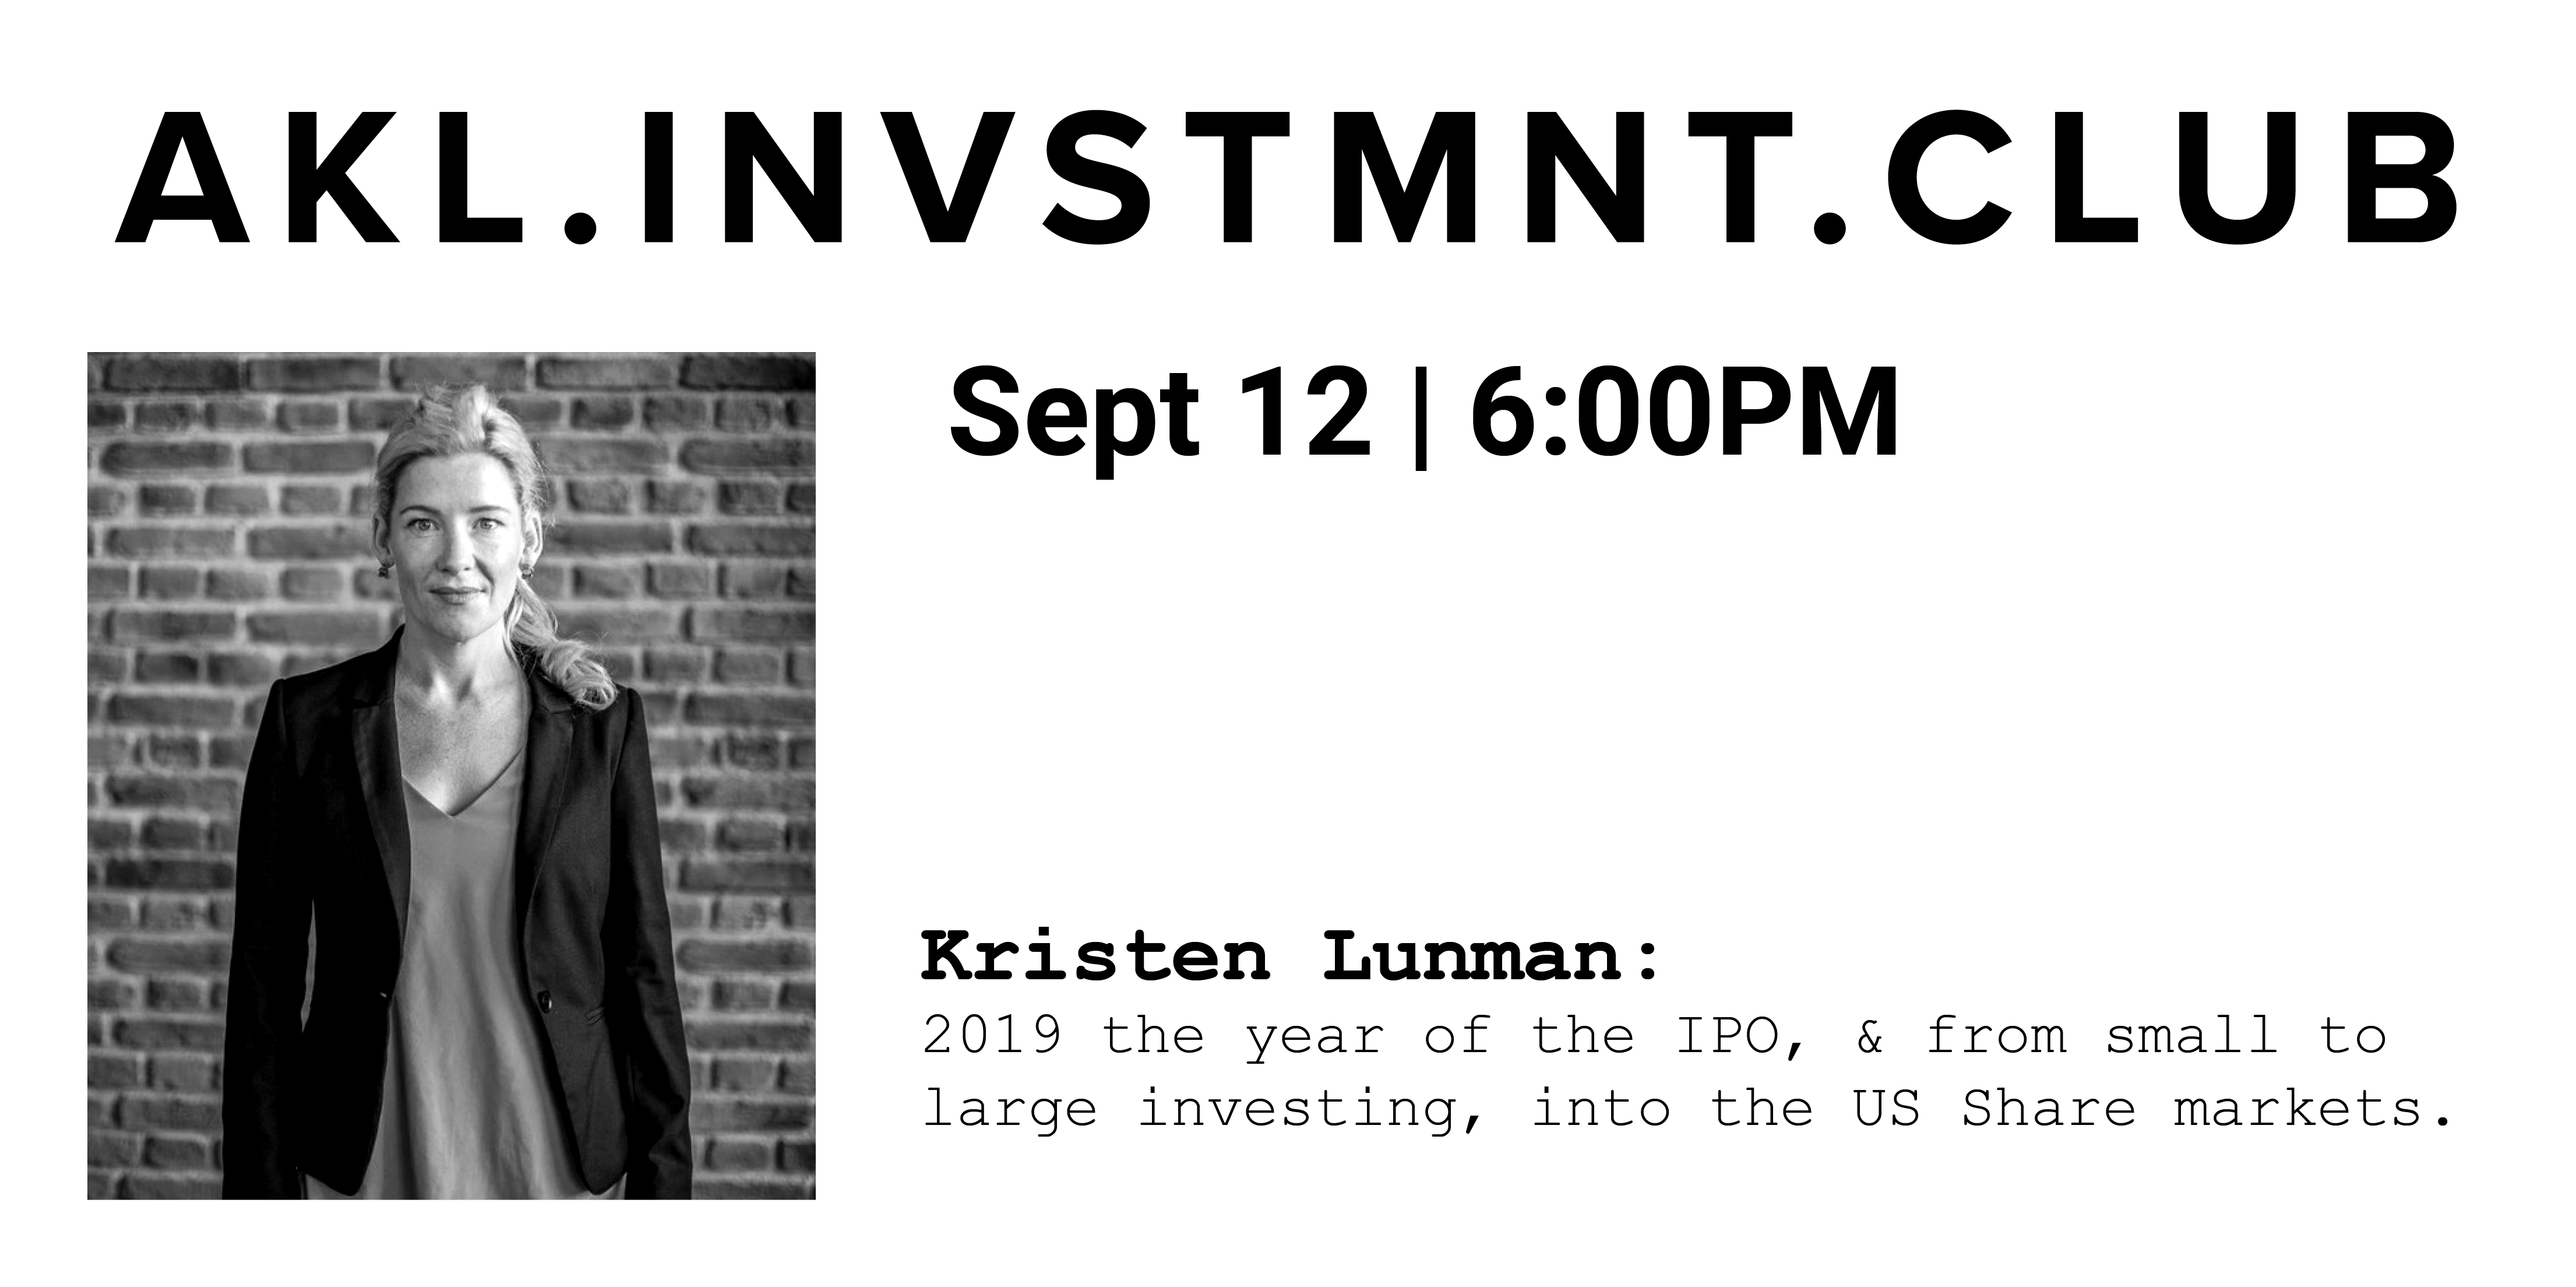 Kristen Lunman: 2019 the year of the IPO.